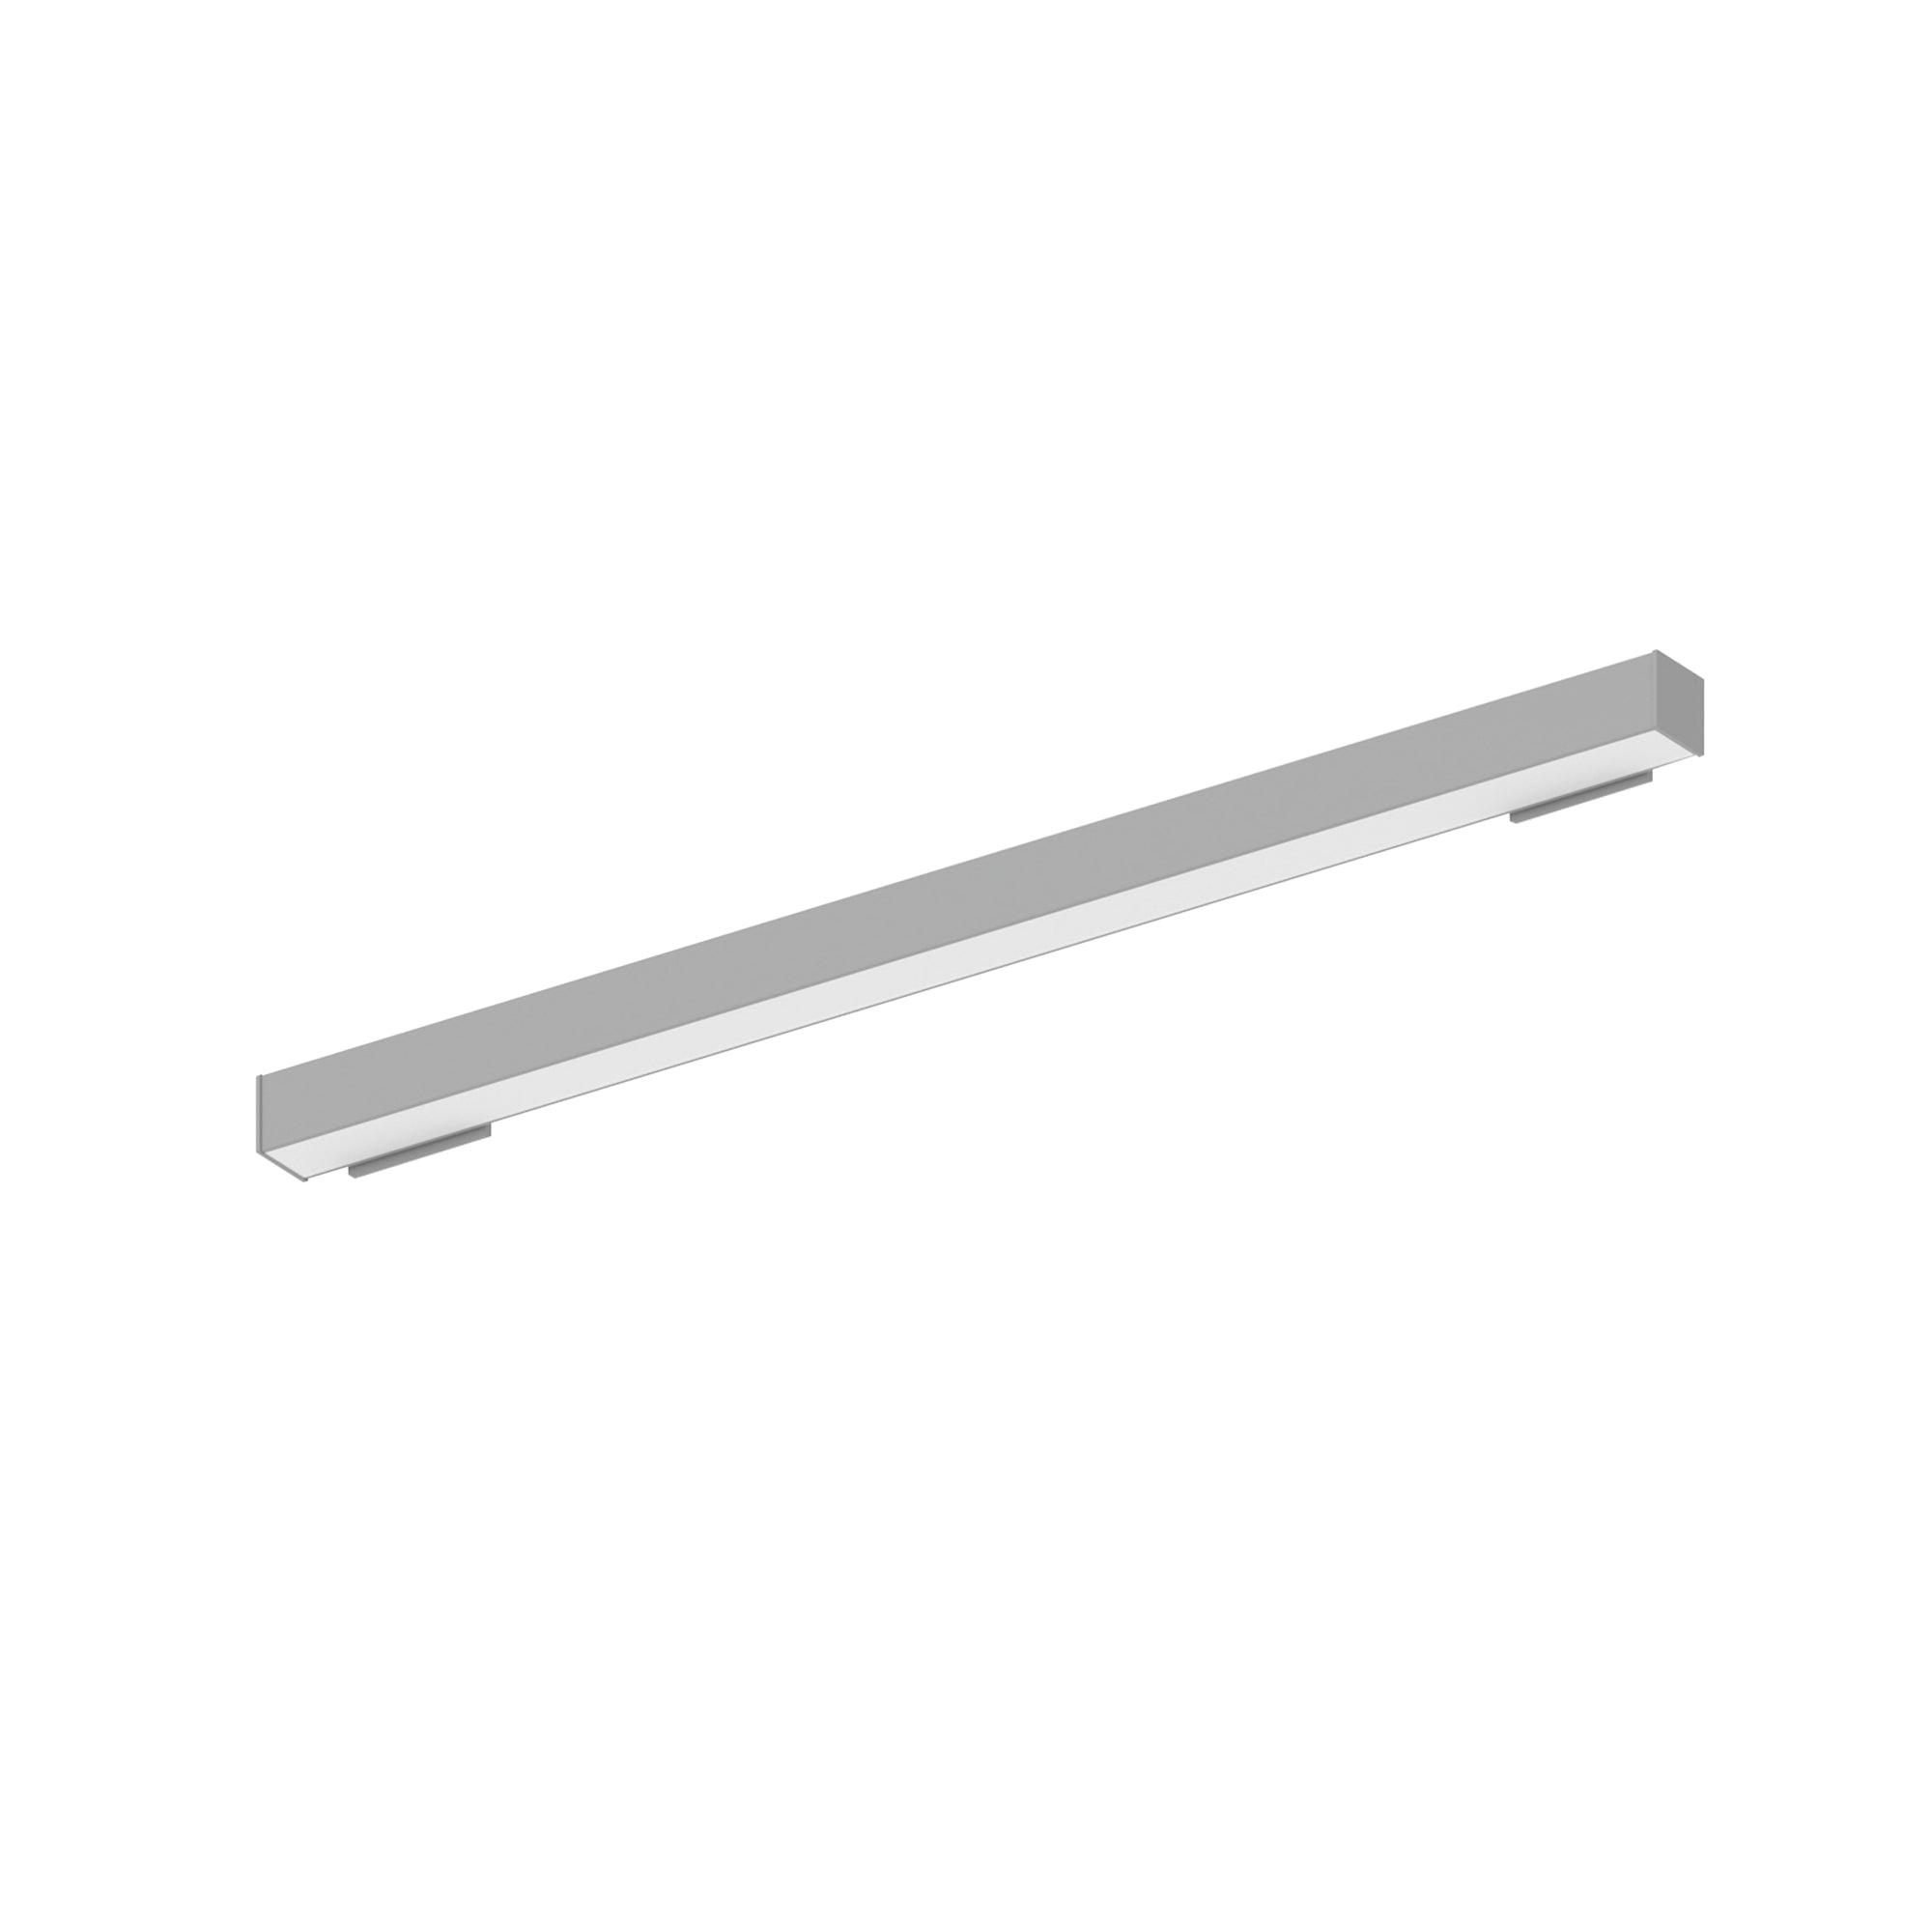 Nora Lighting NWLIN-41035A/L2-R2 - Linear - 4' L-Line LED Wall Mount Linear, 4200lm / 3500K, 2 Inchx4 Inch Left Plate & 2 Inchx4 Inch Right Plate, Aluminum Finish